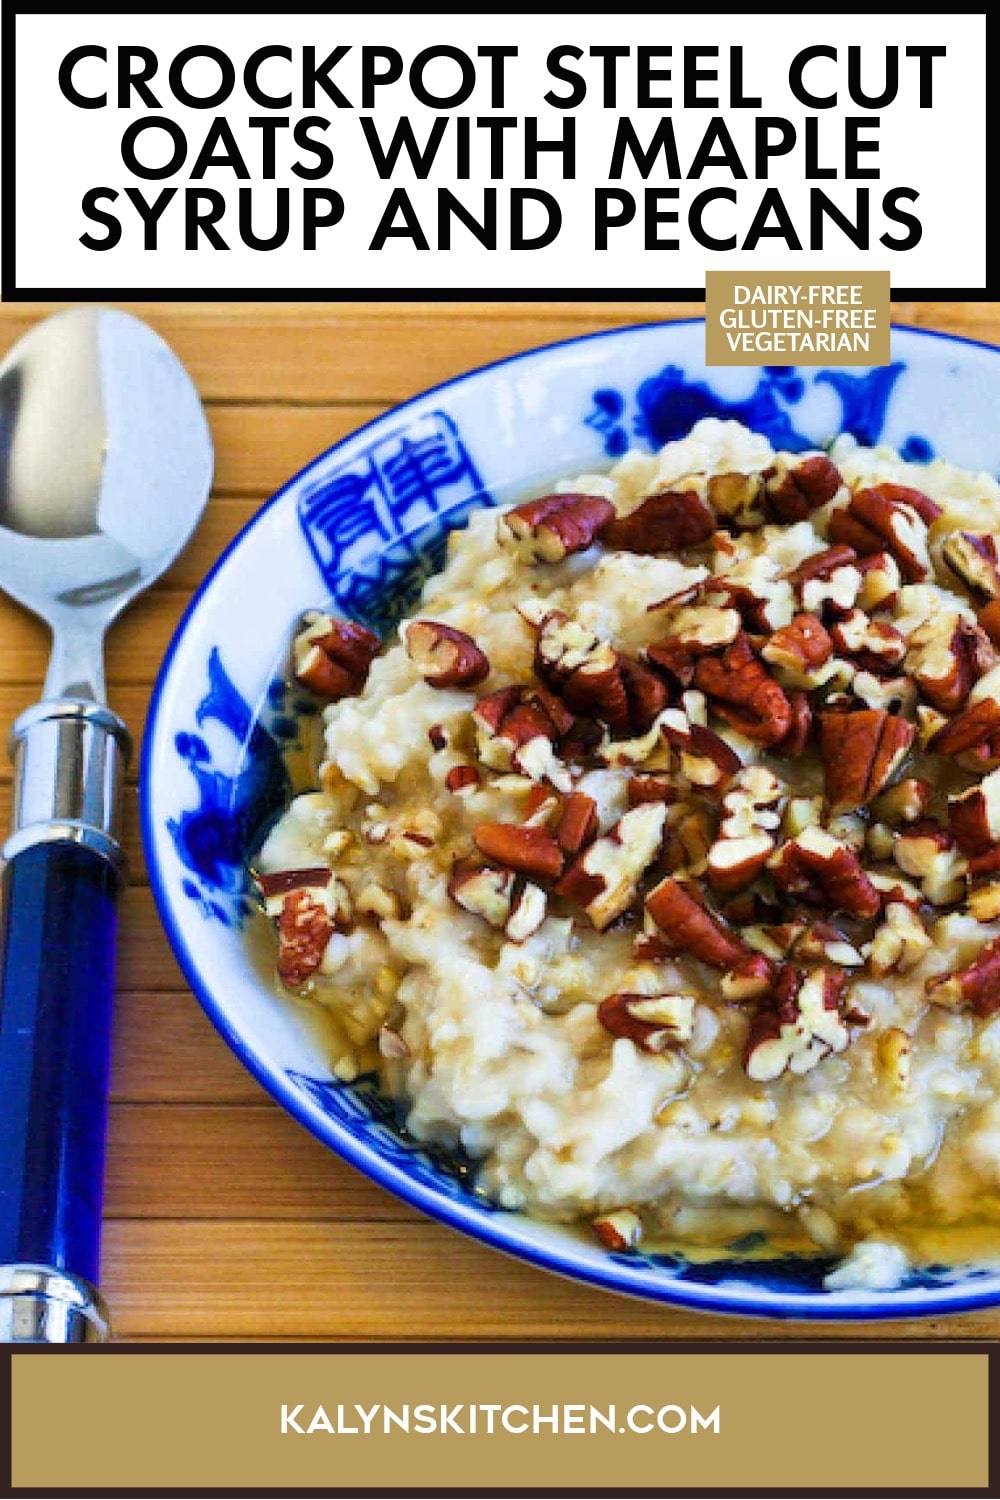 Pinterest image of CrockPot Steel Cut Oats with Maple Syrup and Pecans